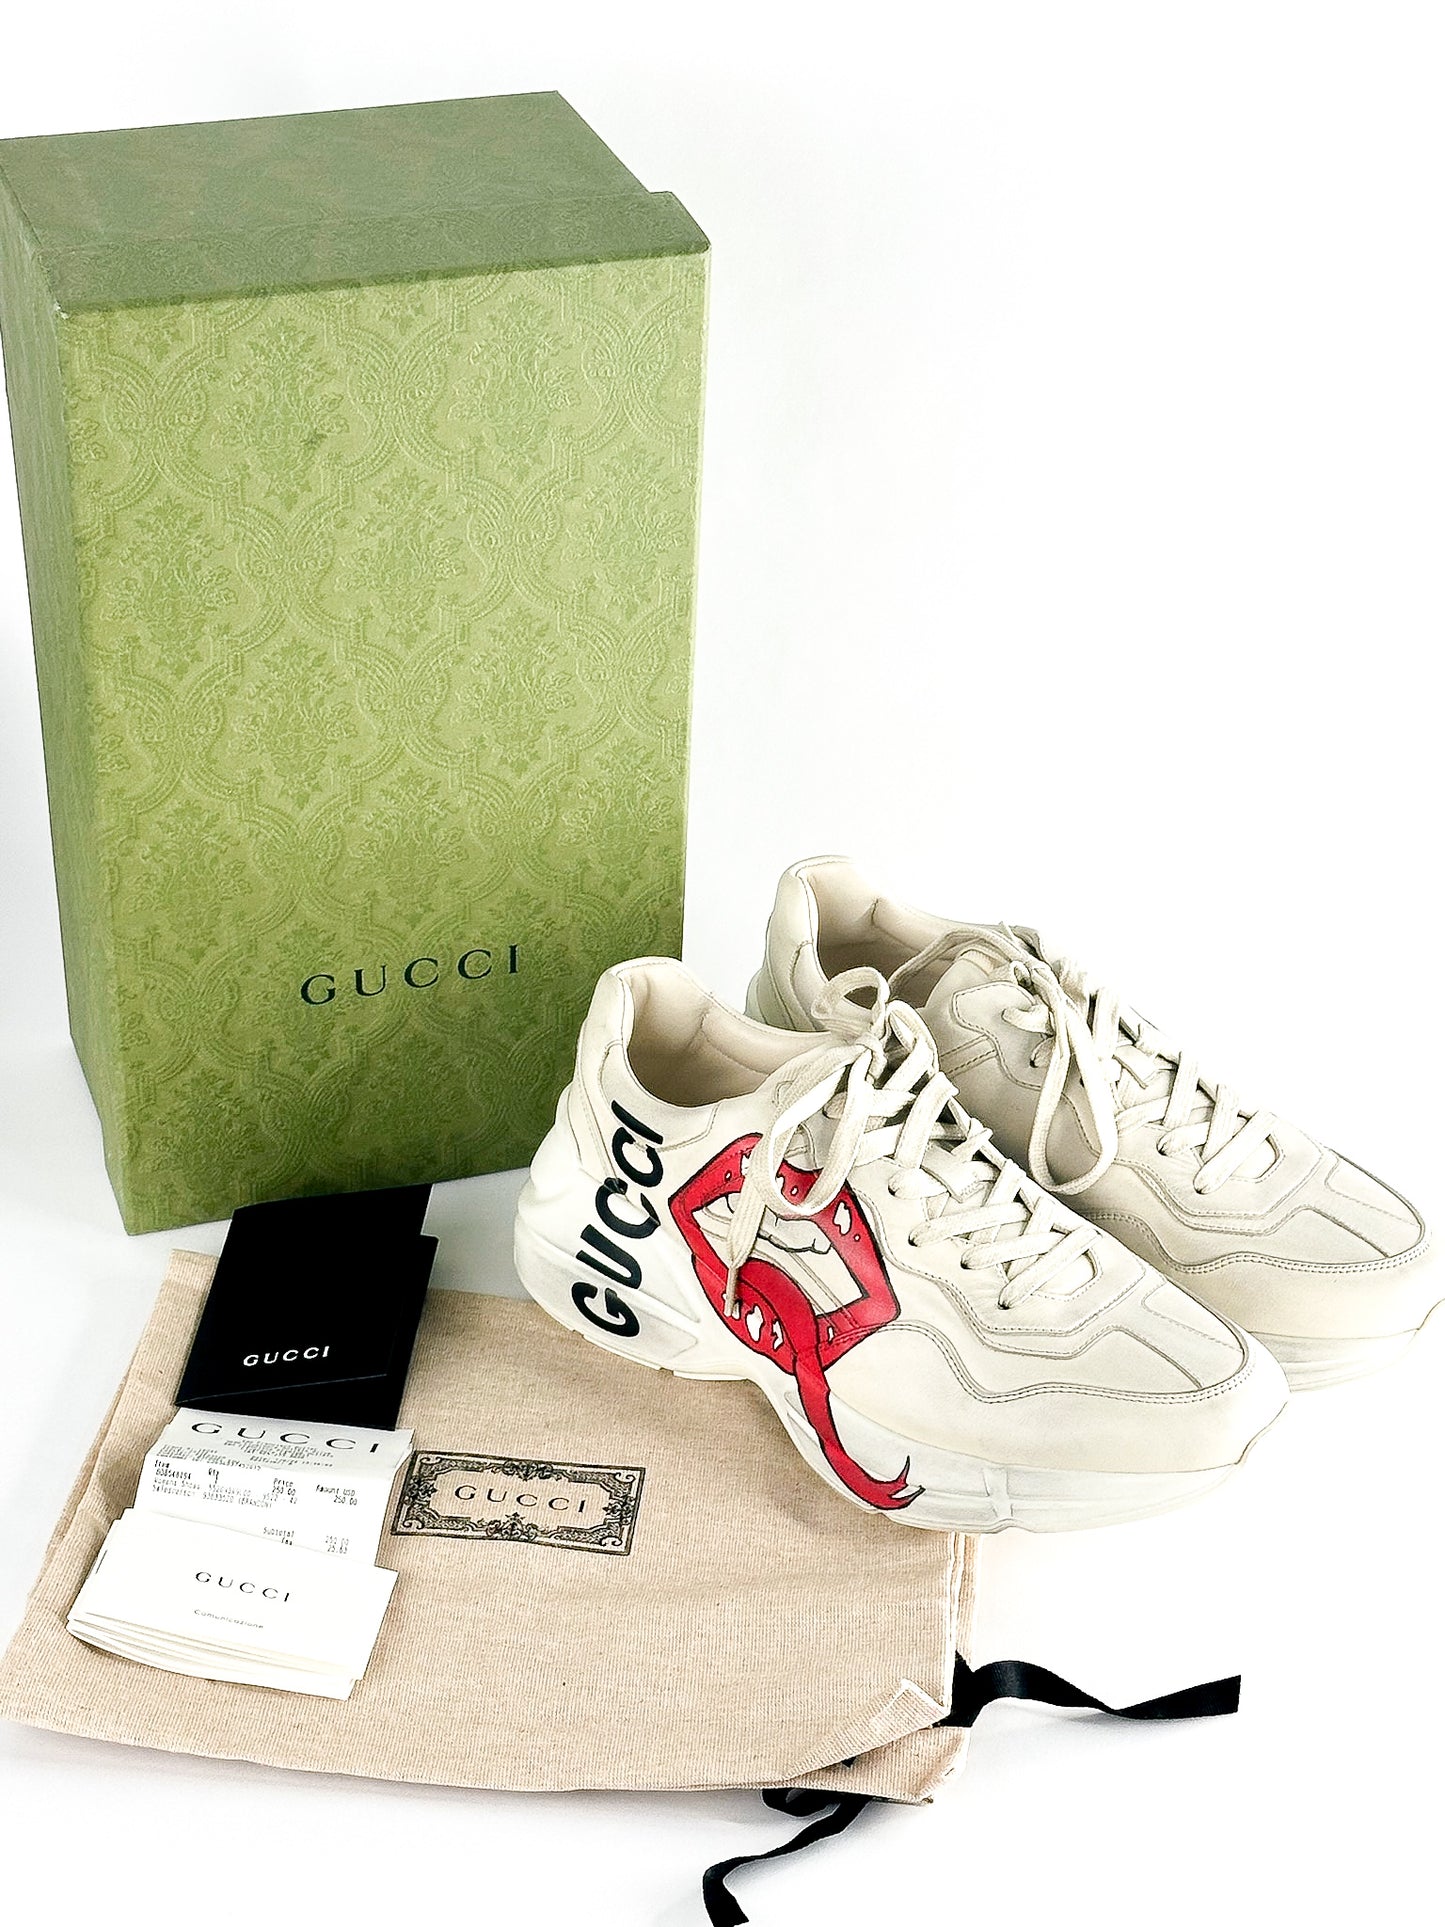 Gucci Cream Leather Rhyton Lace Up Sneakers Size 42